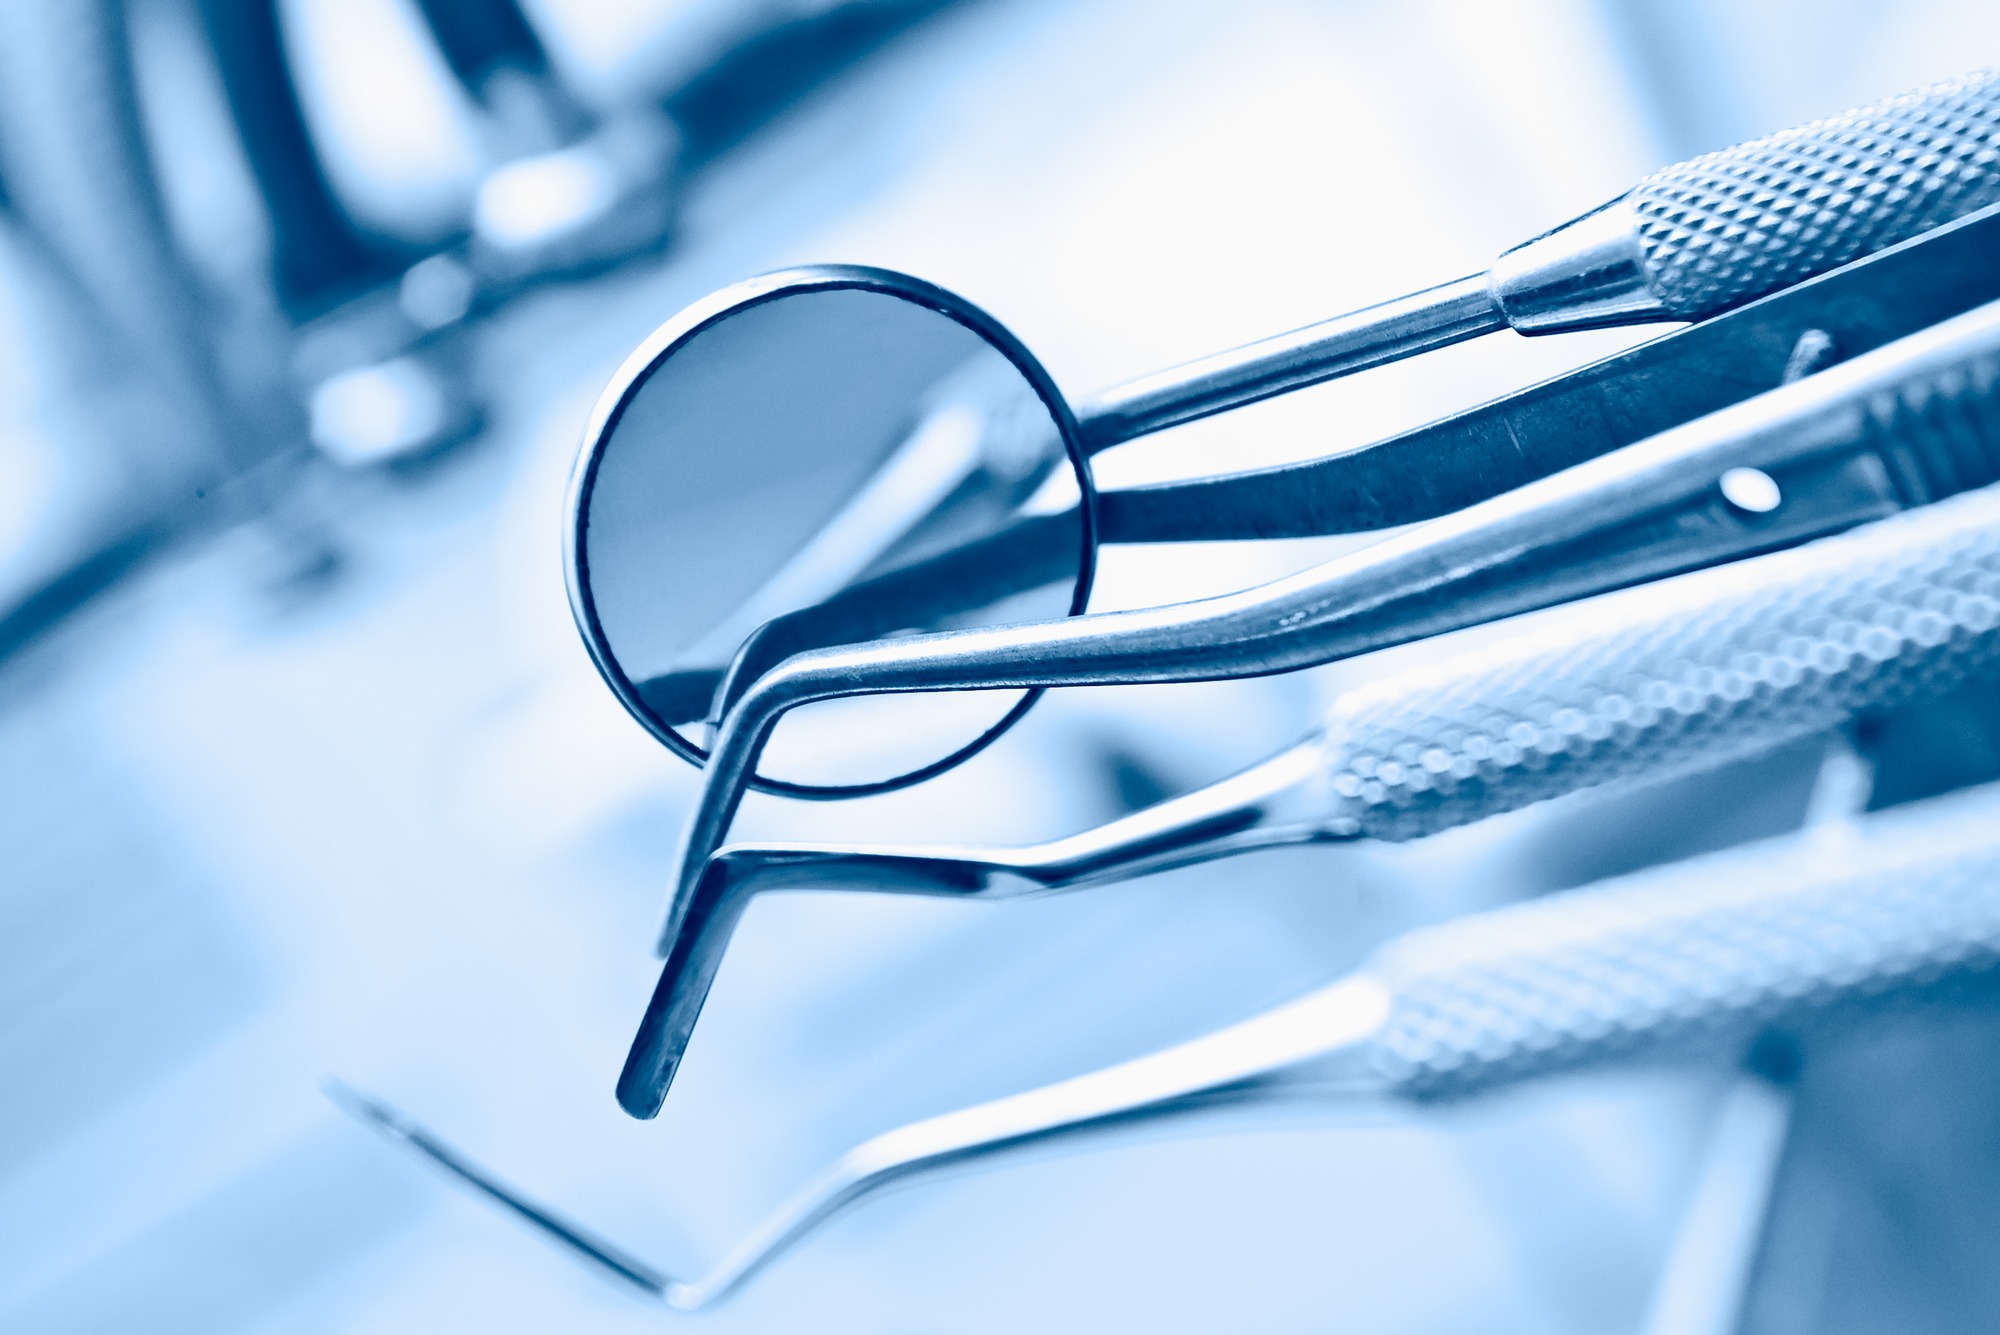 dentist-Beverly-Hills-CA - dentist's instruments with shallow depth of field blue tinted